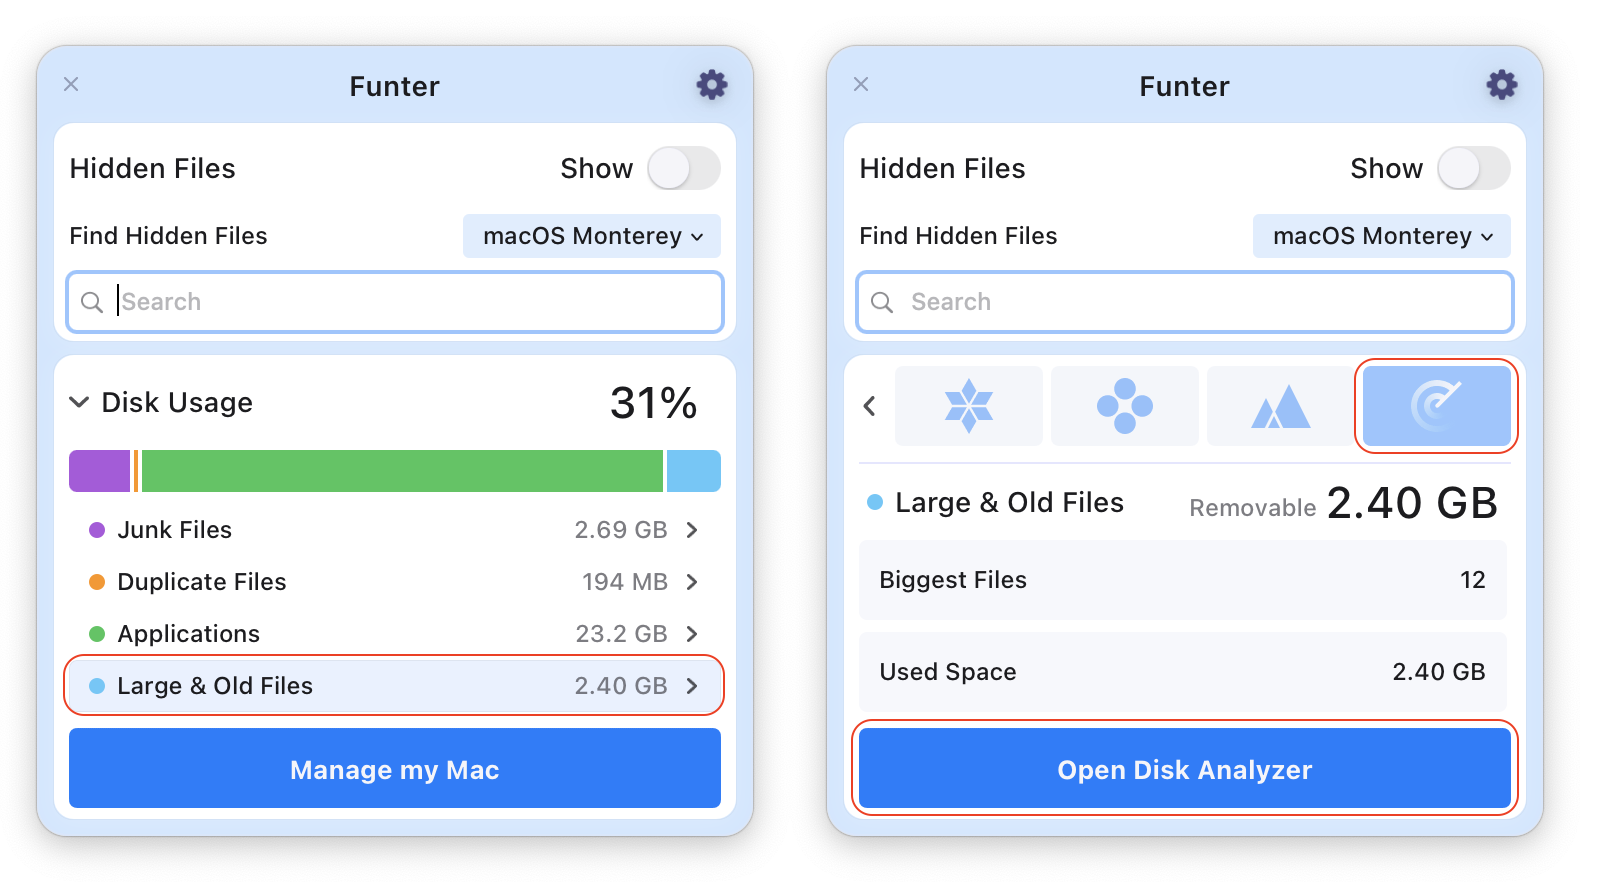 Funter showing the button to open Space Analyzer